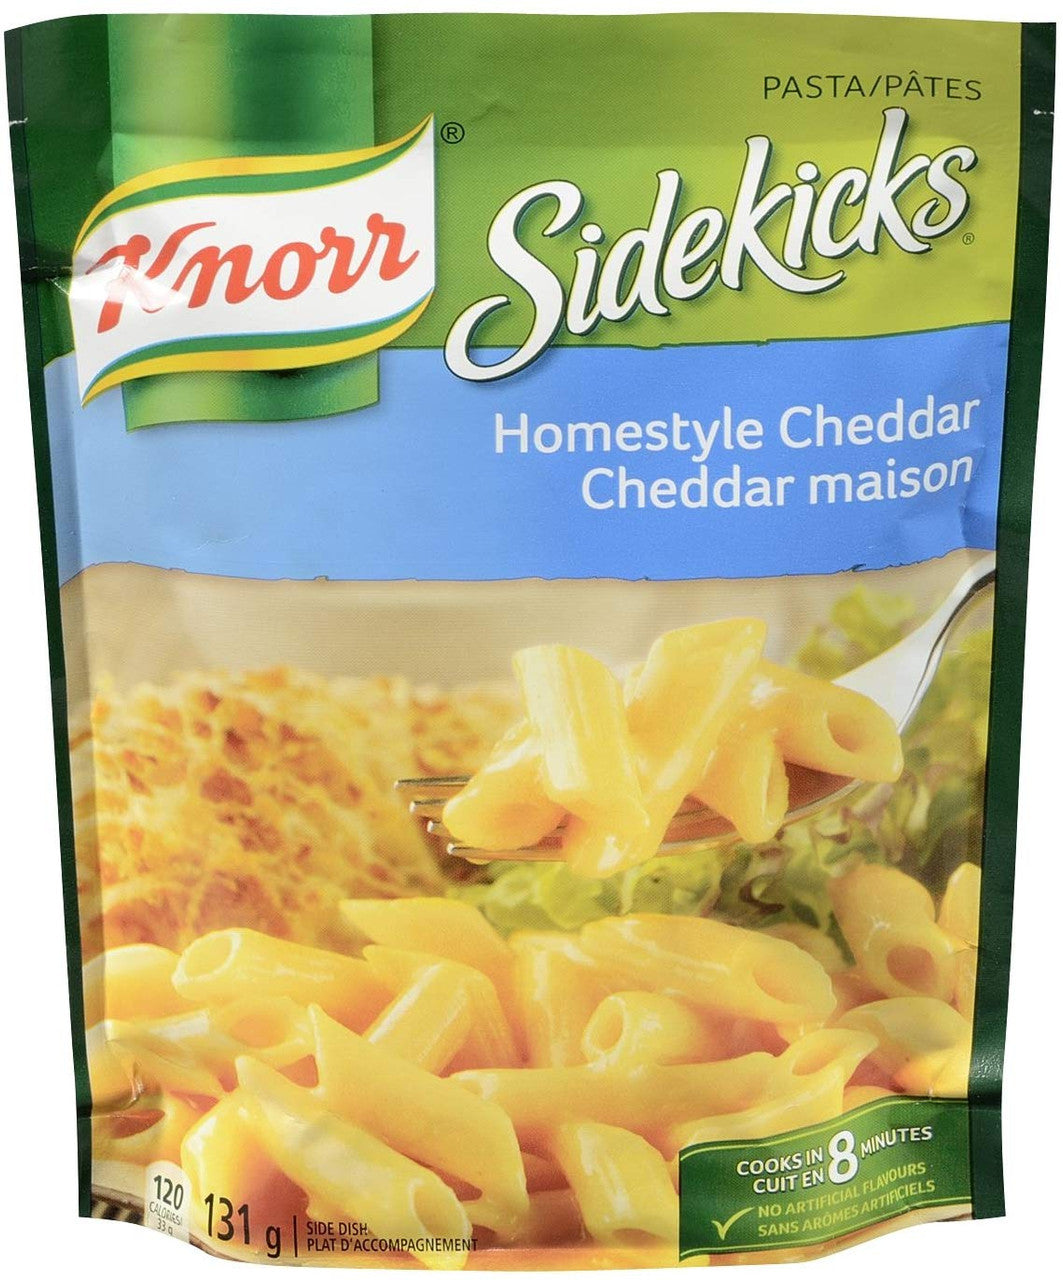 Knorr Pasta Homestyle Cheddar Side Dishes 131g/4.6 oz., 8pk {Imported from Canada}